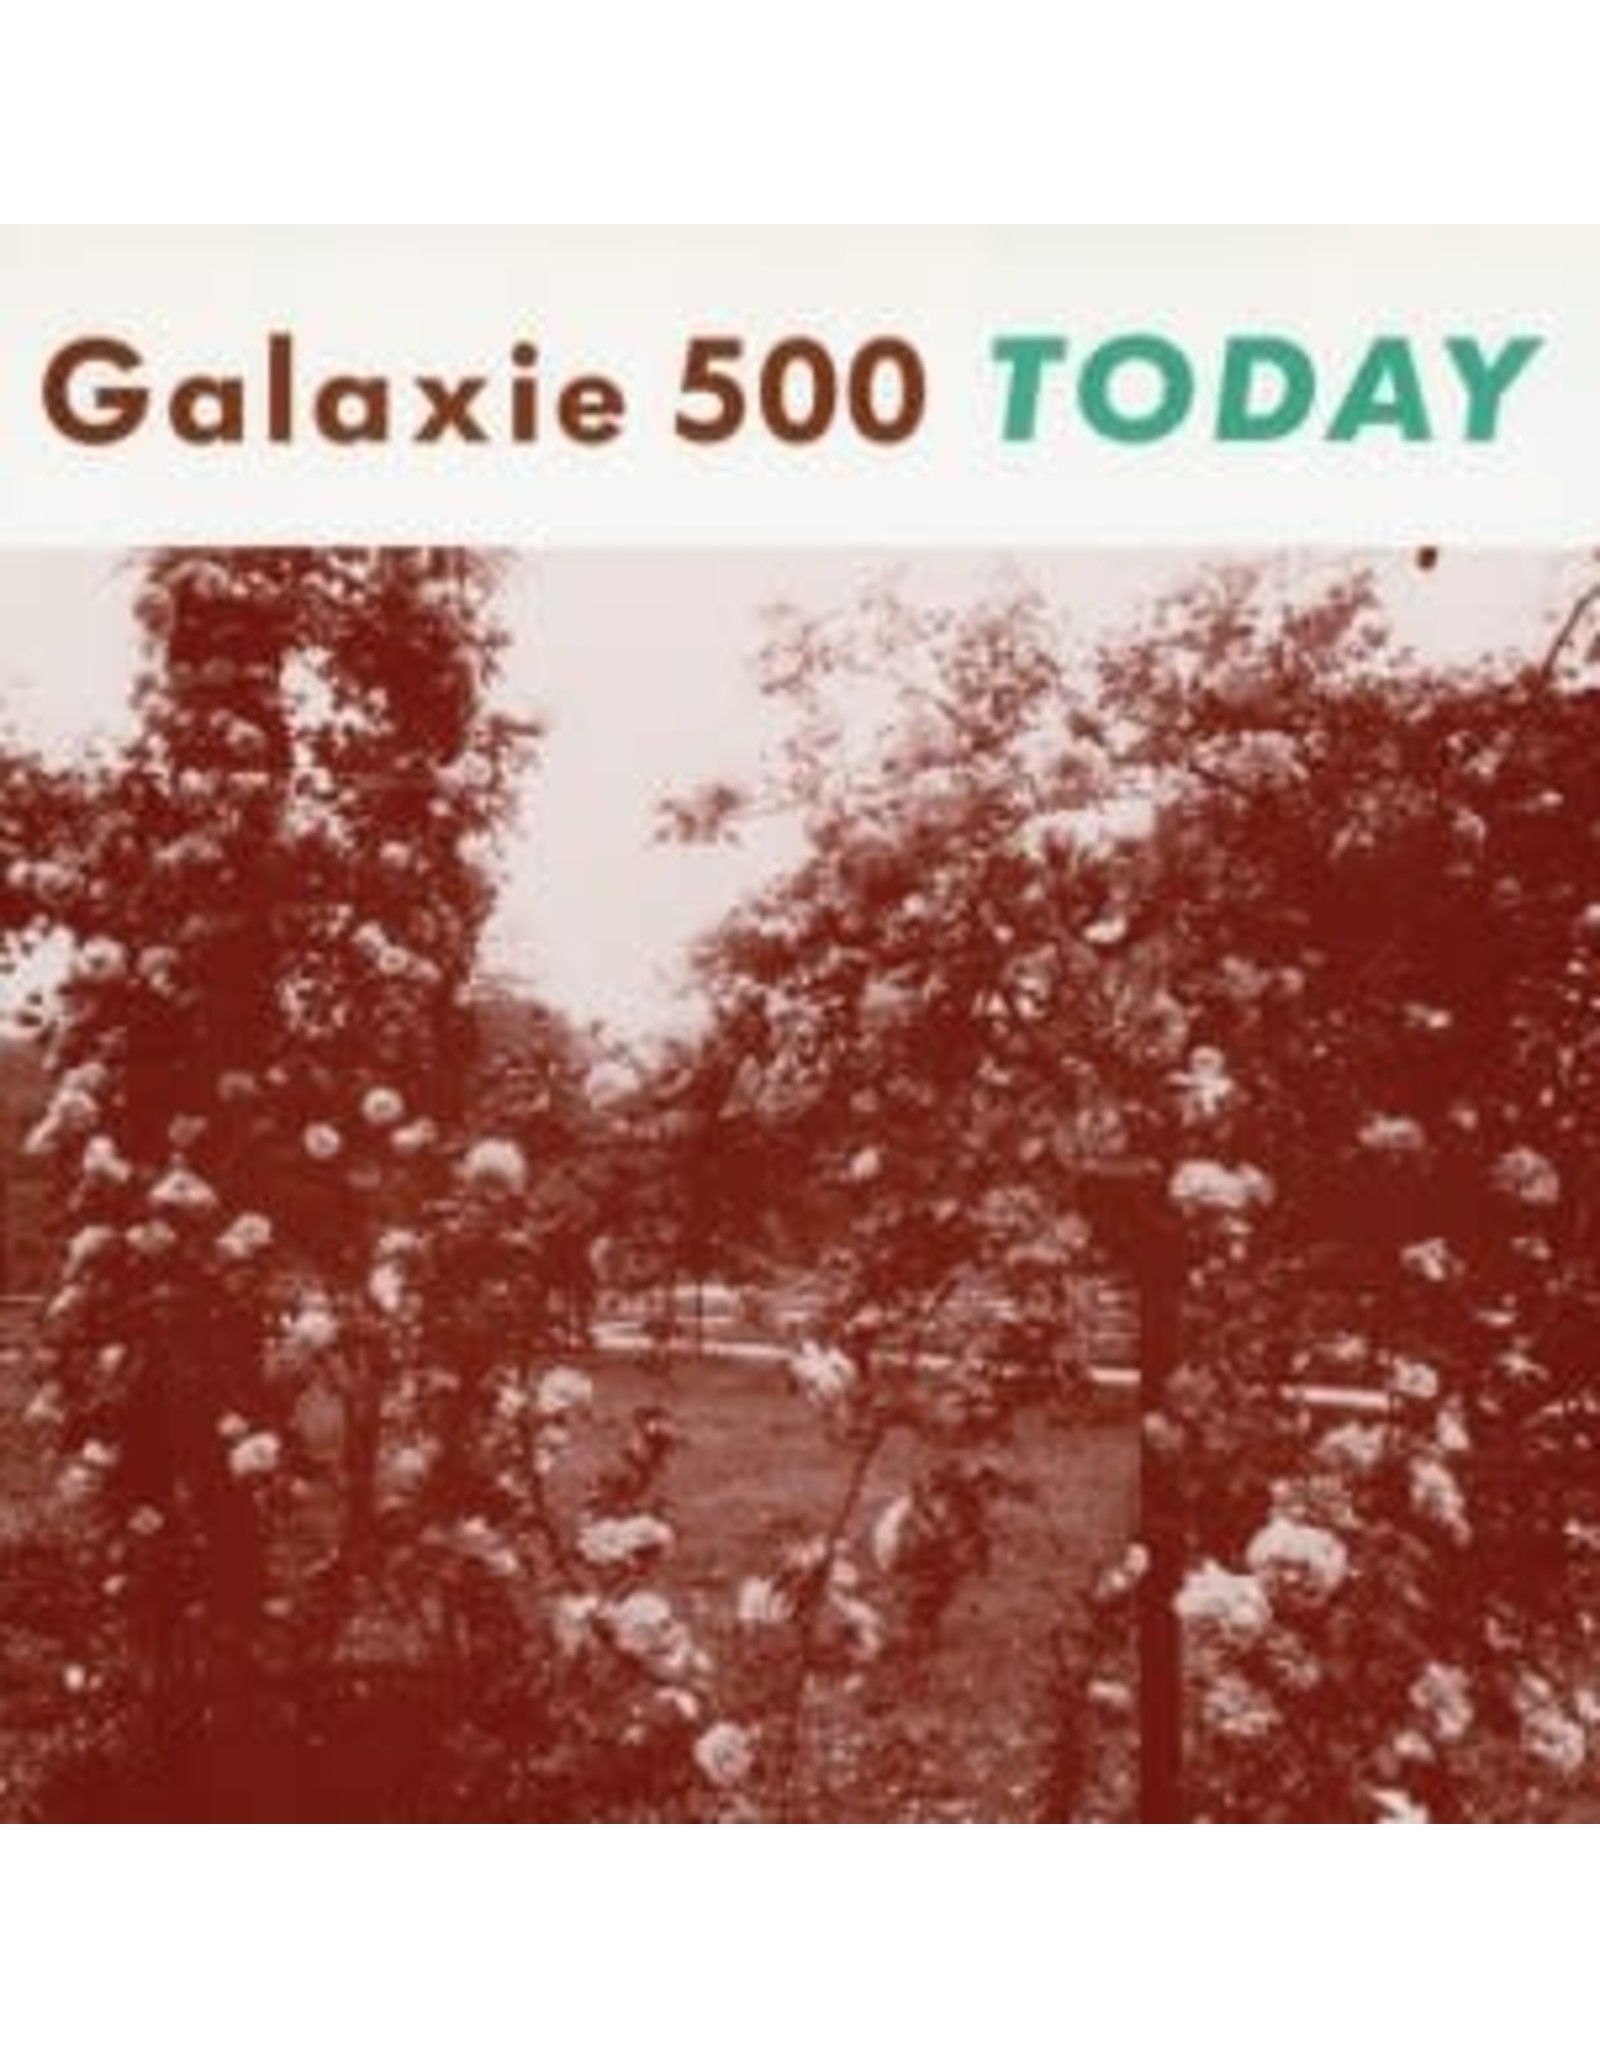 Galaxie 500: Today LP